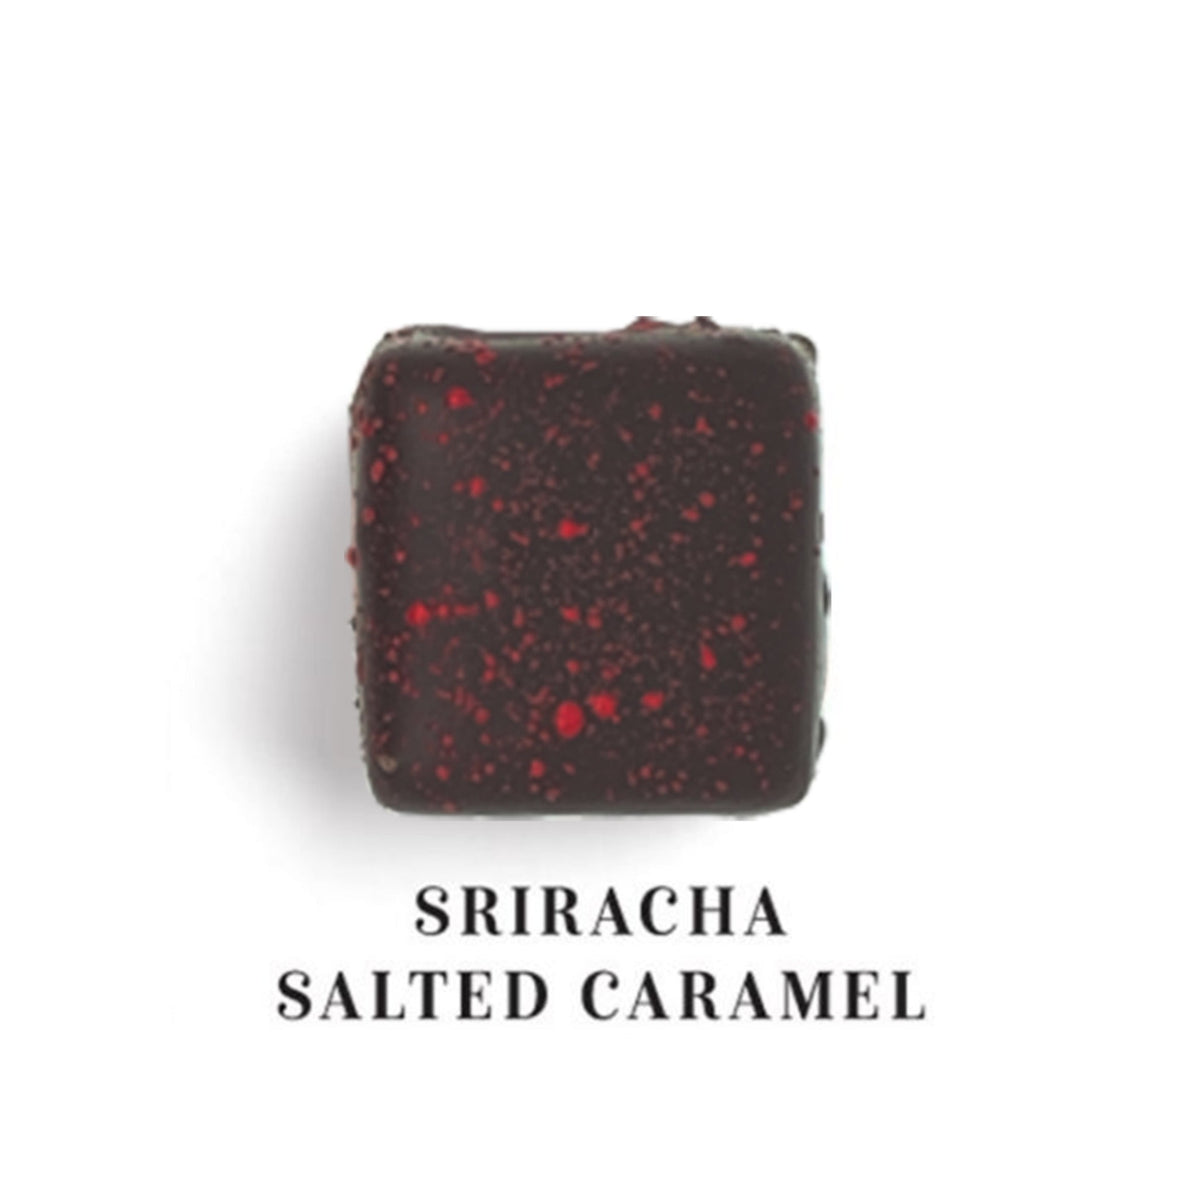 Sriracha Caramels in Dark Chocolate made with real Sriracha salt for a subtle spicy aftertaste